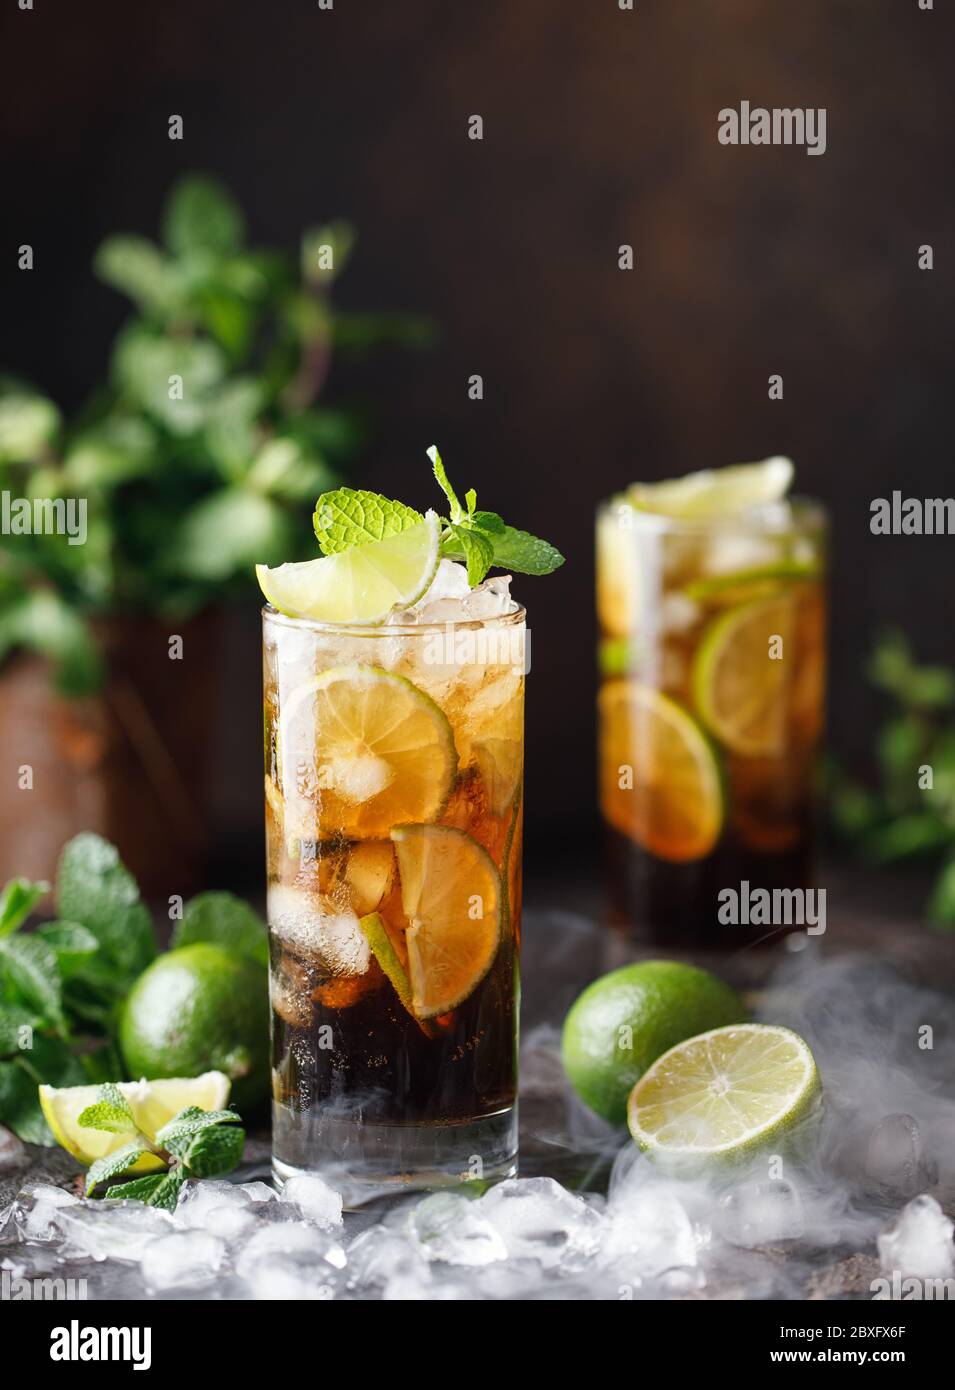 https://c8.alamy.com/comp/2BXFX6F/cuba-libre-with-brown-rum-cola-mint-and-lime-cuba-libre-or-long-island-iced-tea-cocktail-with-strong-drinks-2BXFX6F.jpg